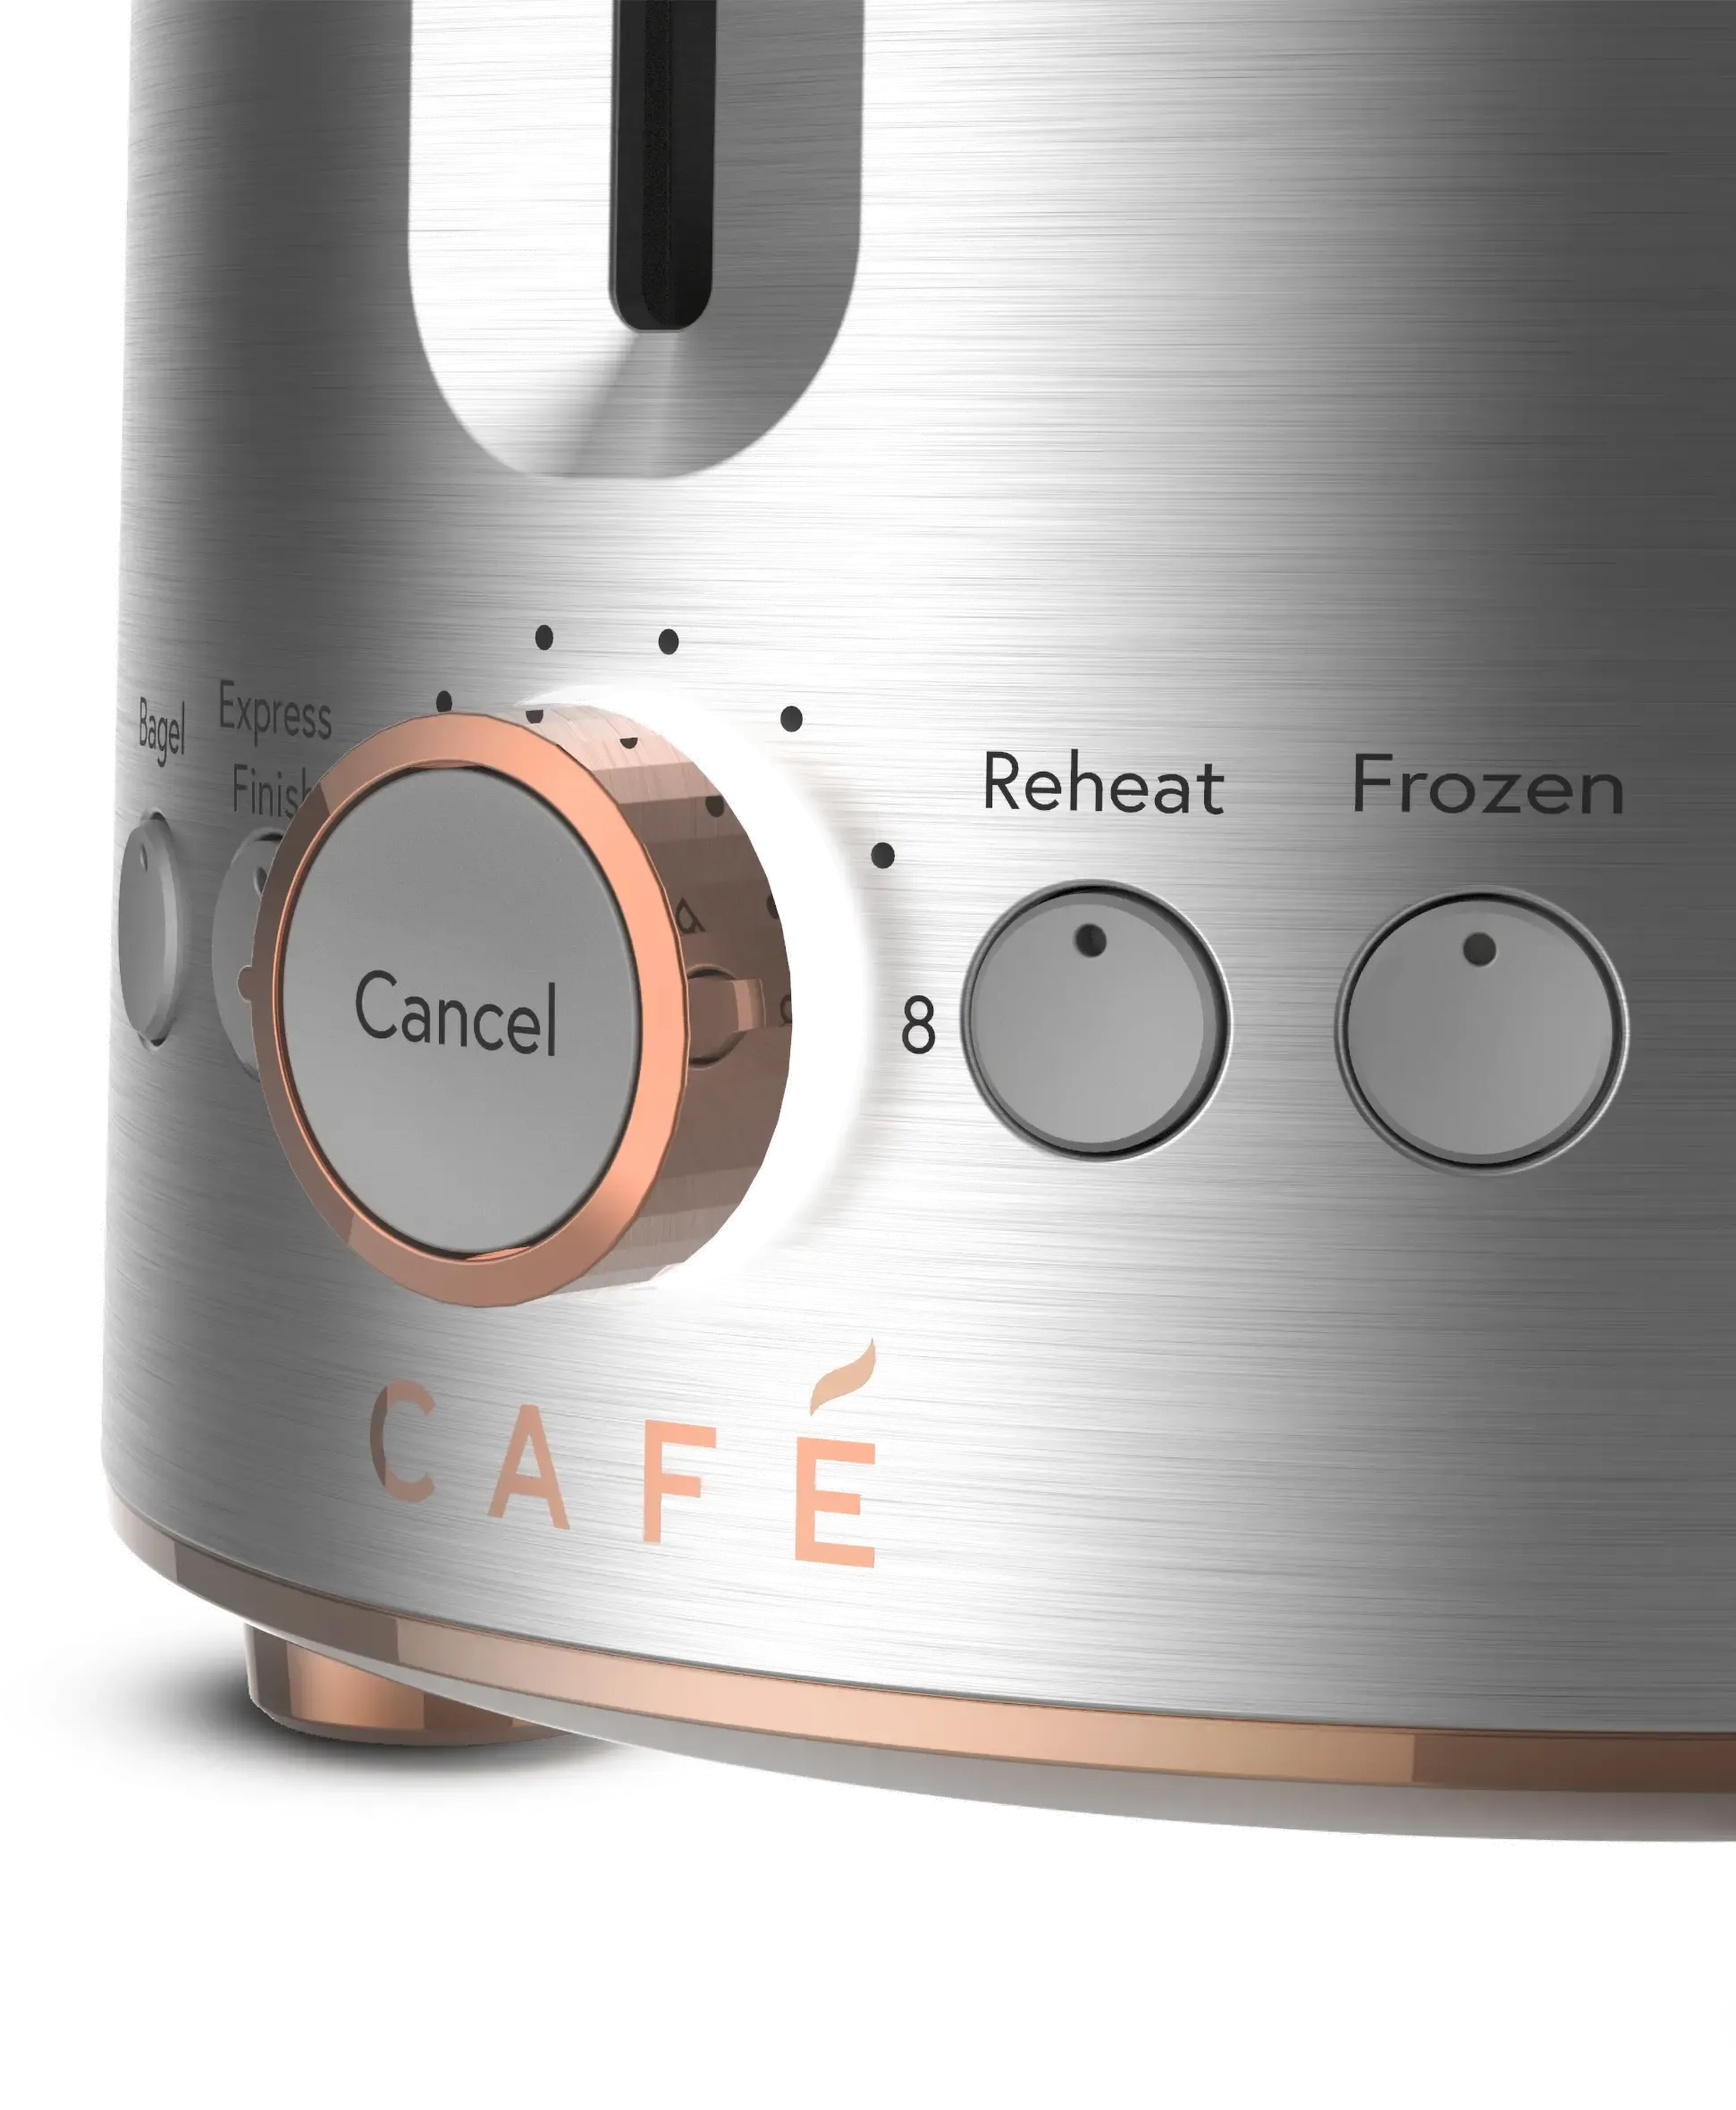 Cafe Toaster - Stainless Steel